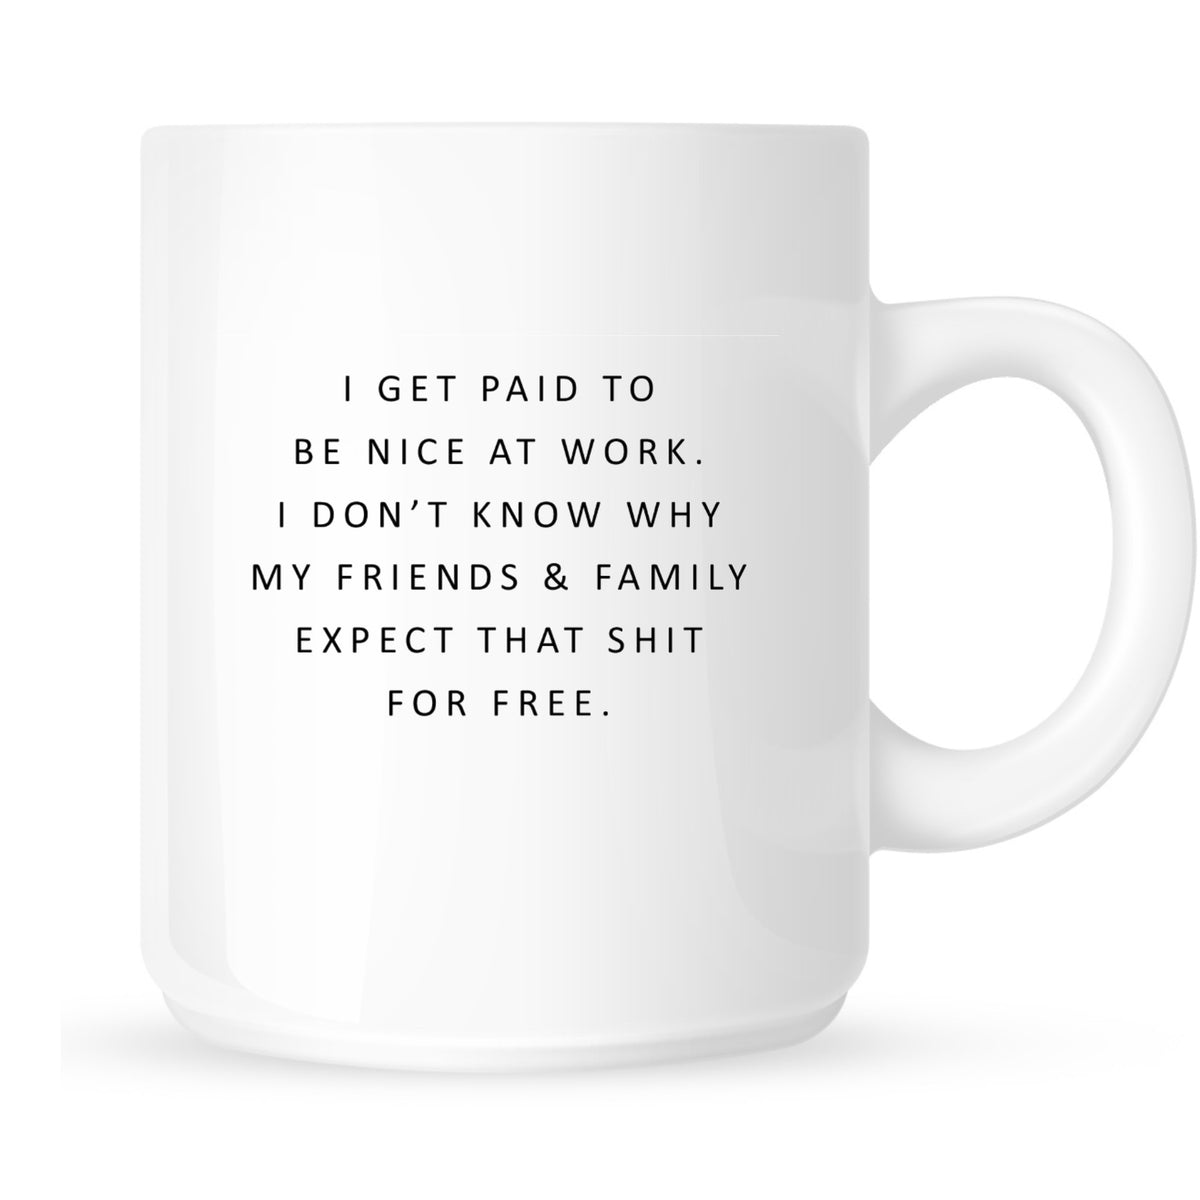 Mug - I Get Paid to Be Nice at Work. I Don't Know Why My Friends & Family Expect that Shit for Free